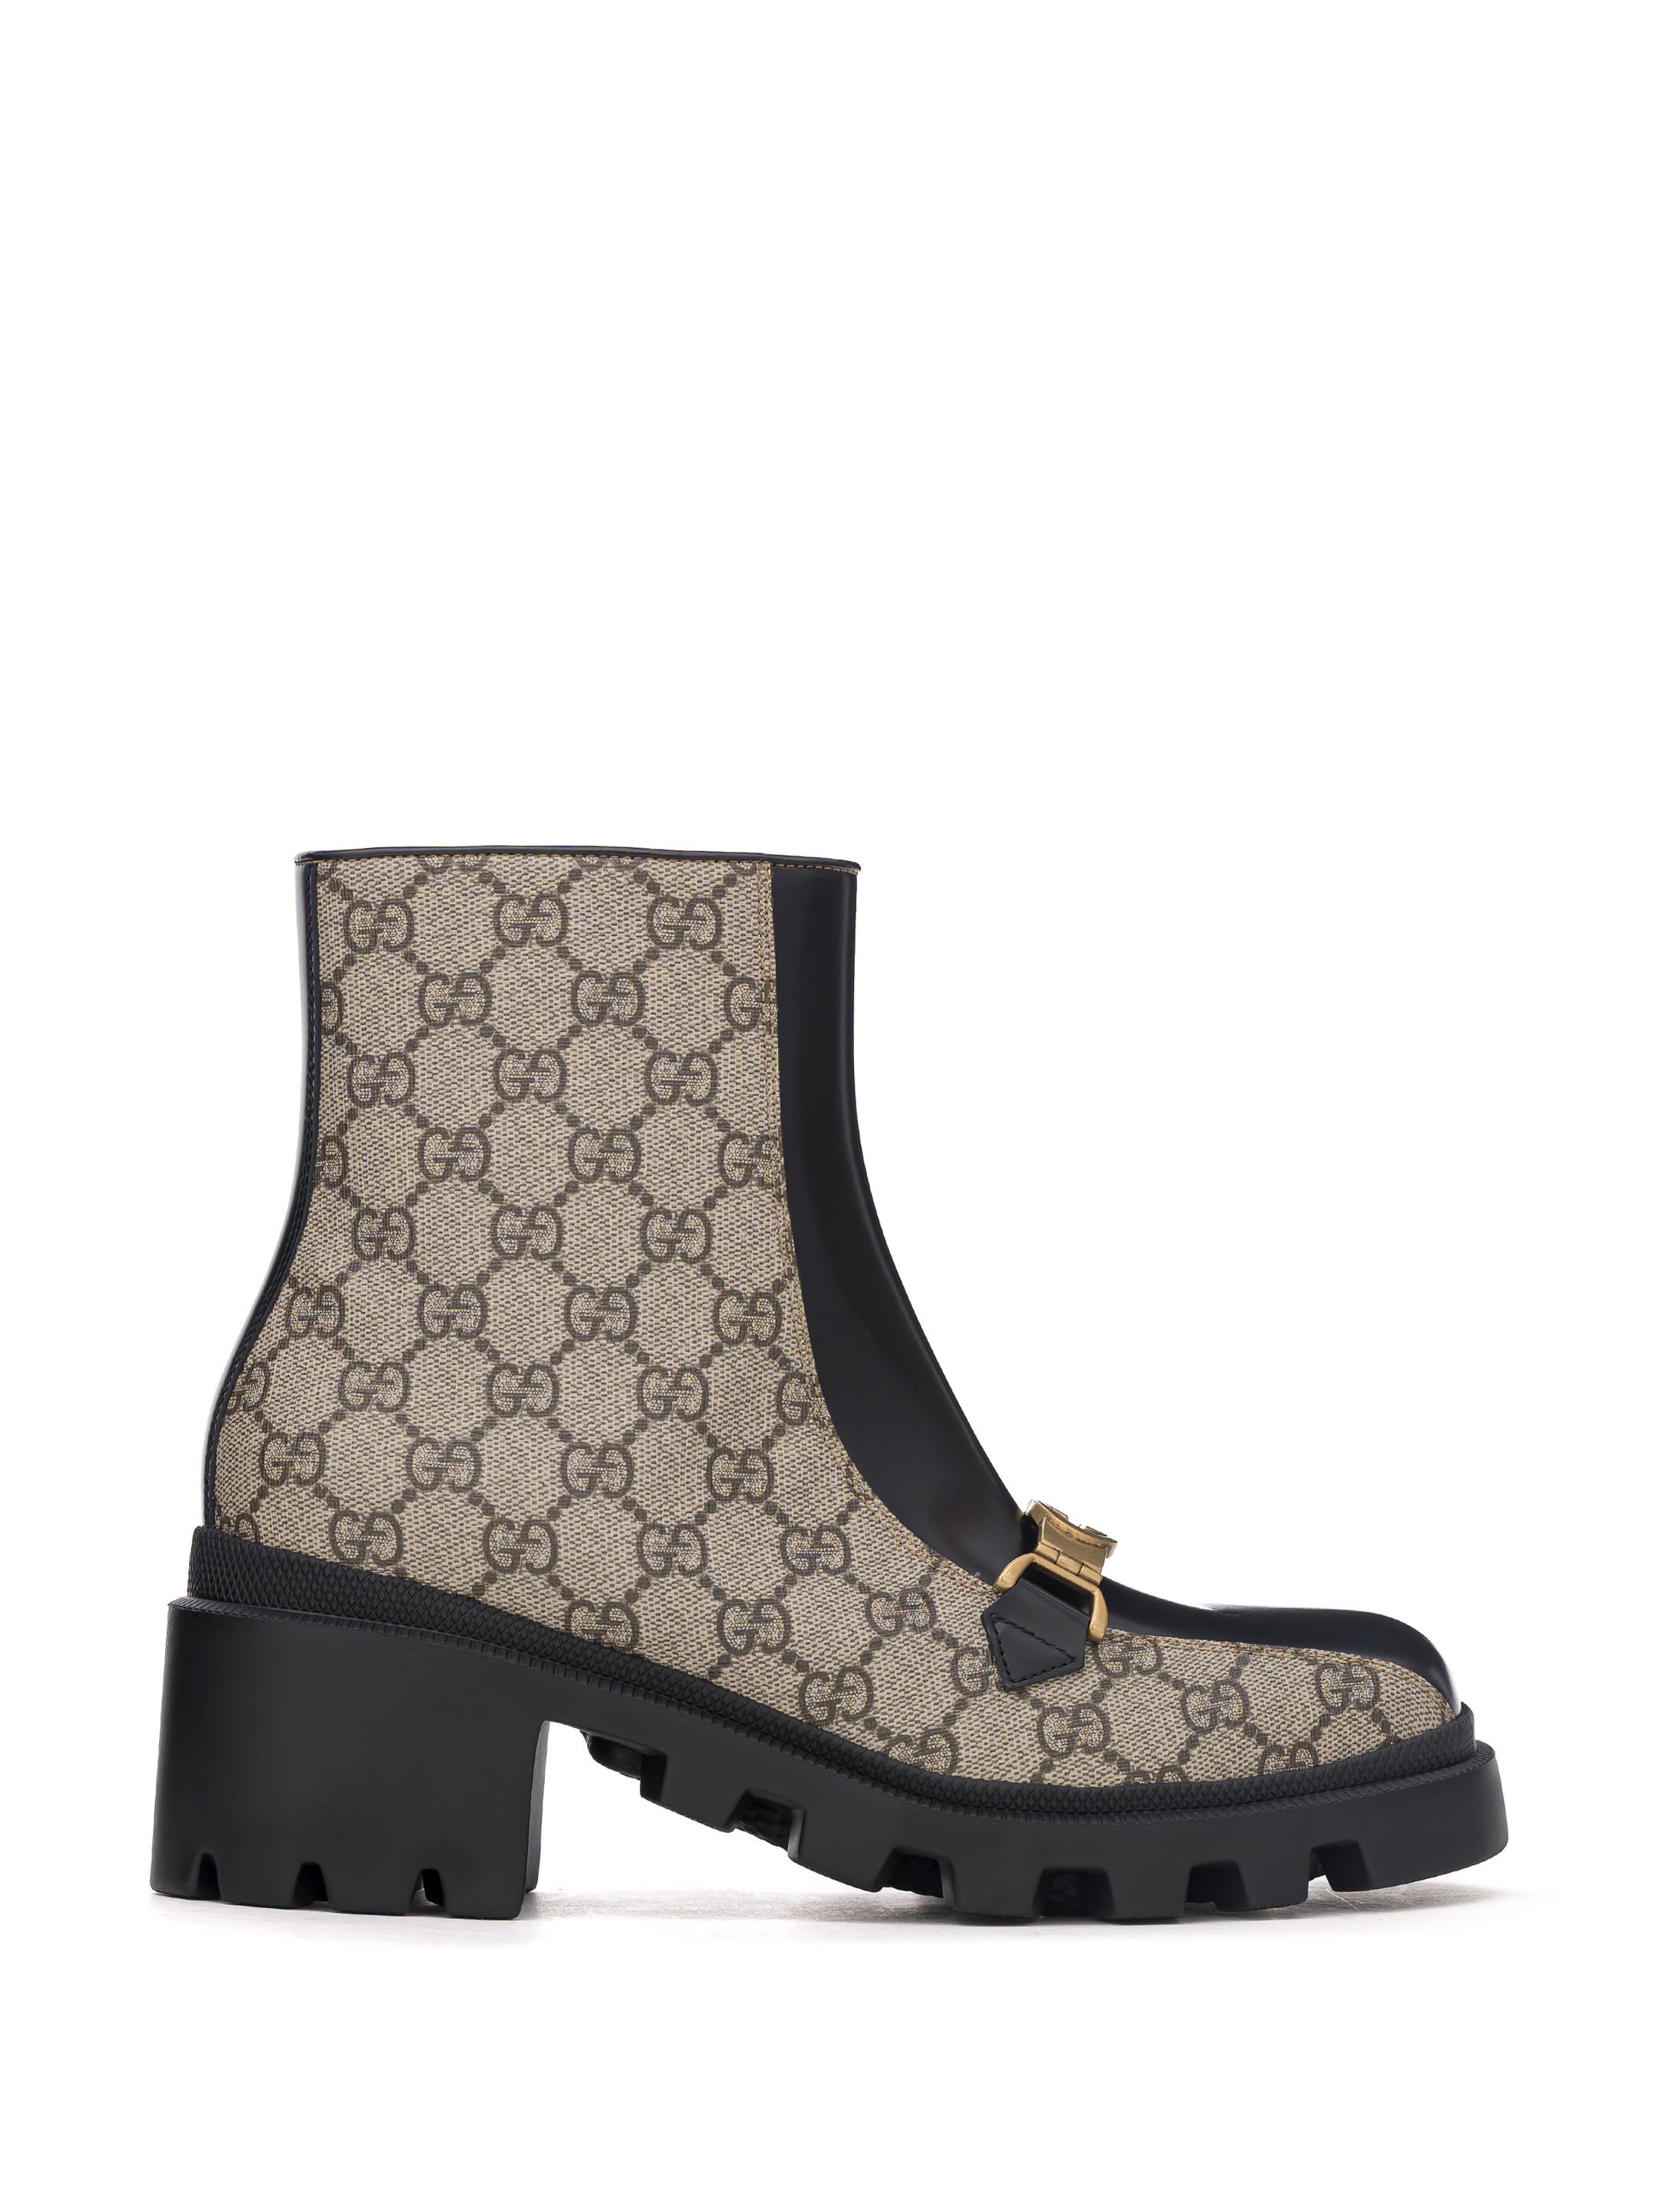 Gucci Interlocking G boots buy 539400 KZT in the official Viled online store, art. 670412